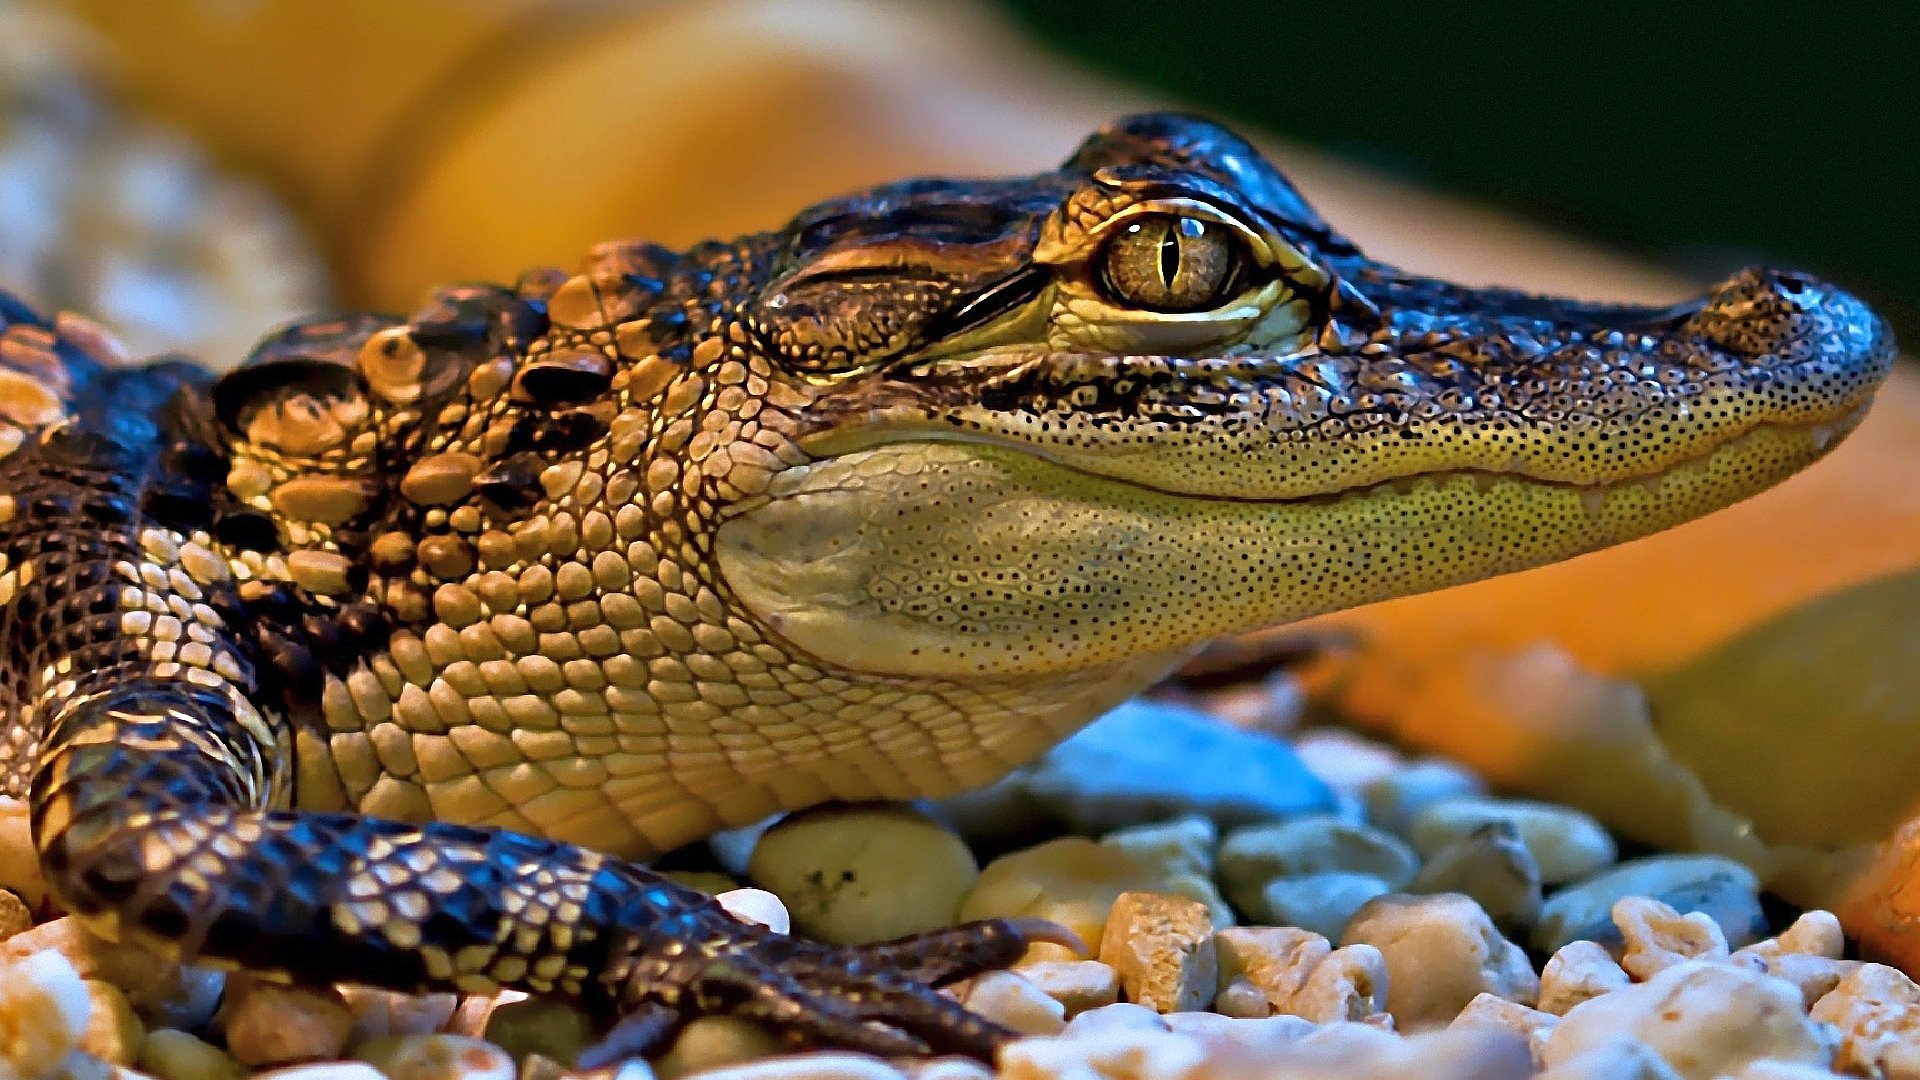 Little Crocodile Full HD Wallpaper and Background Image | 1920x1080